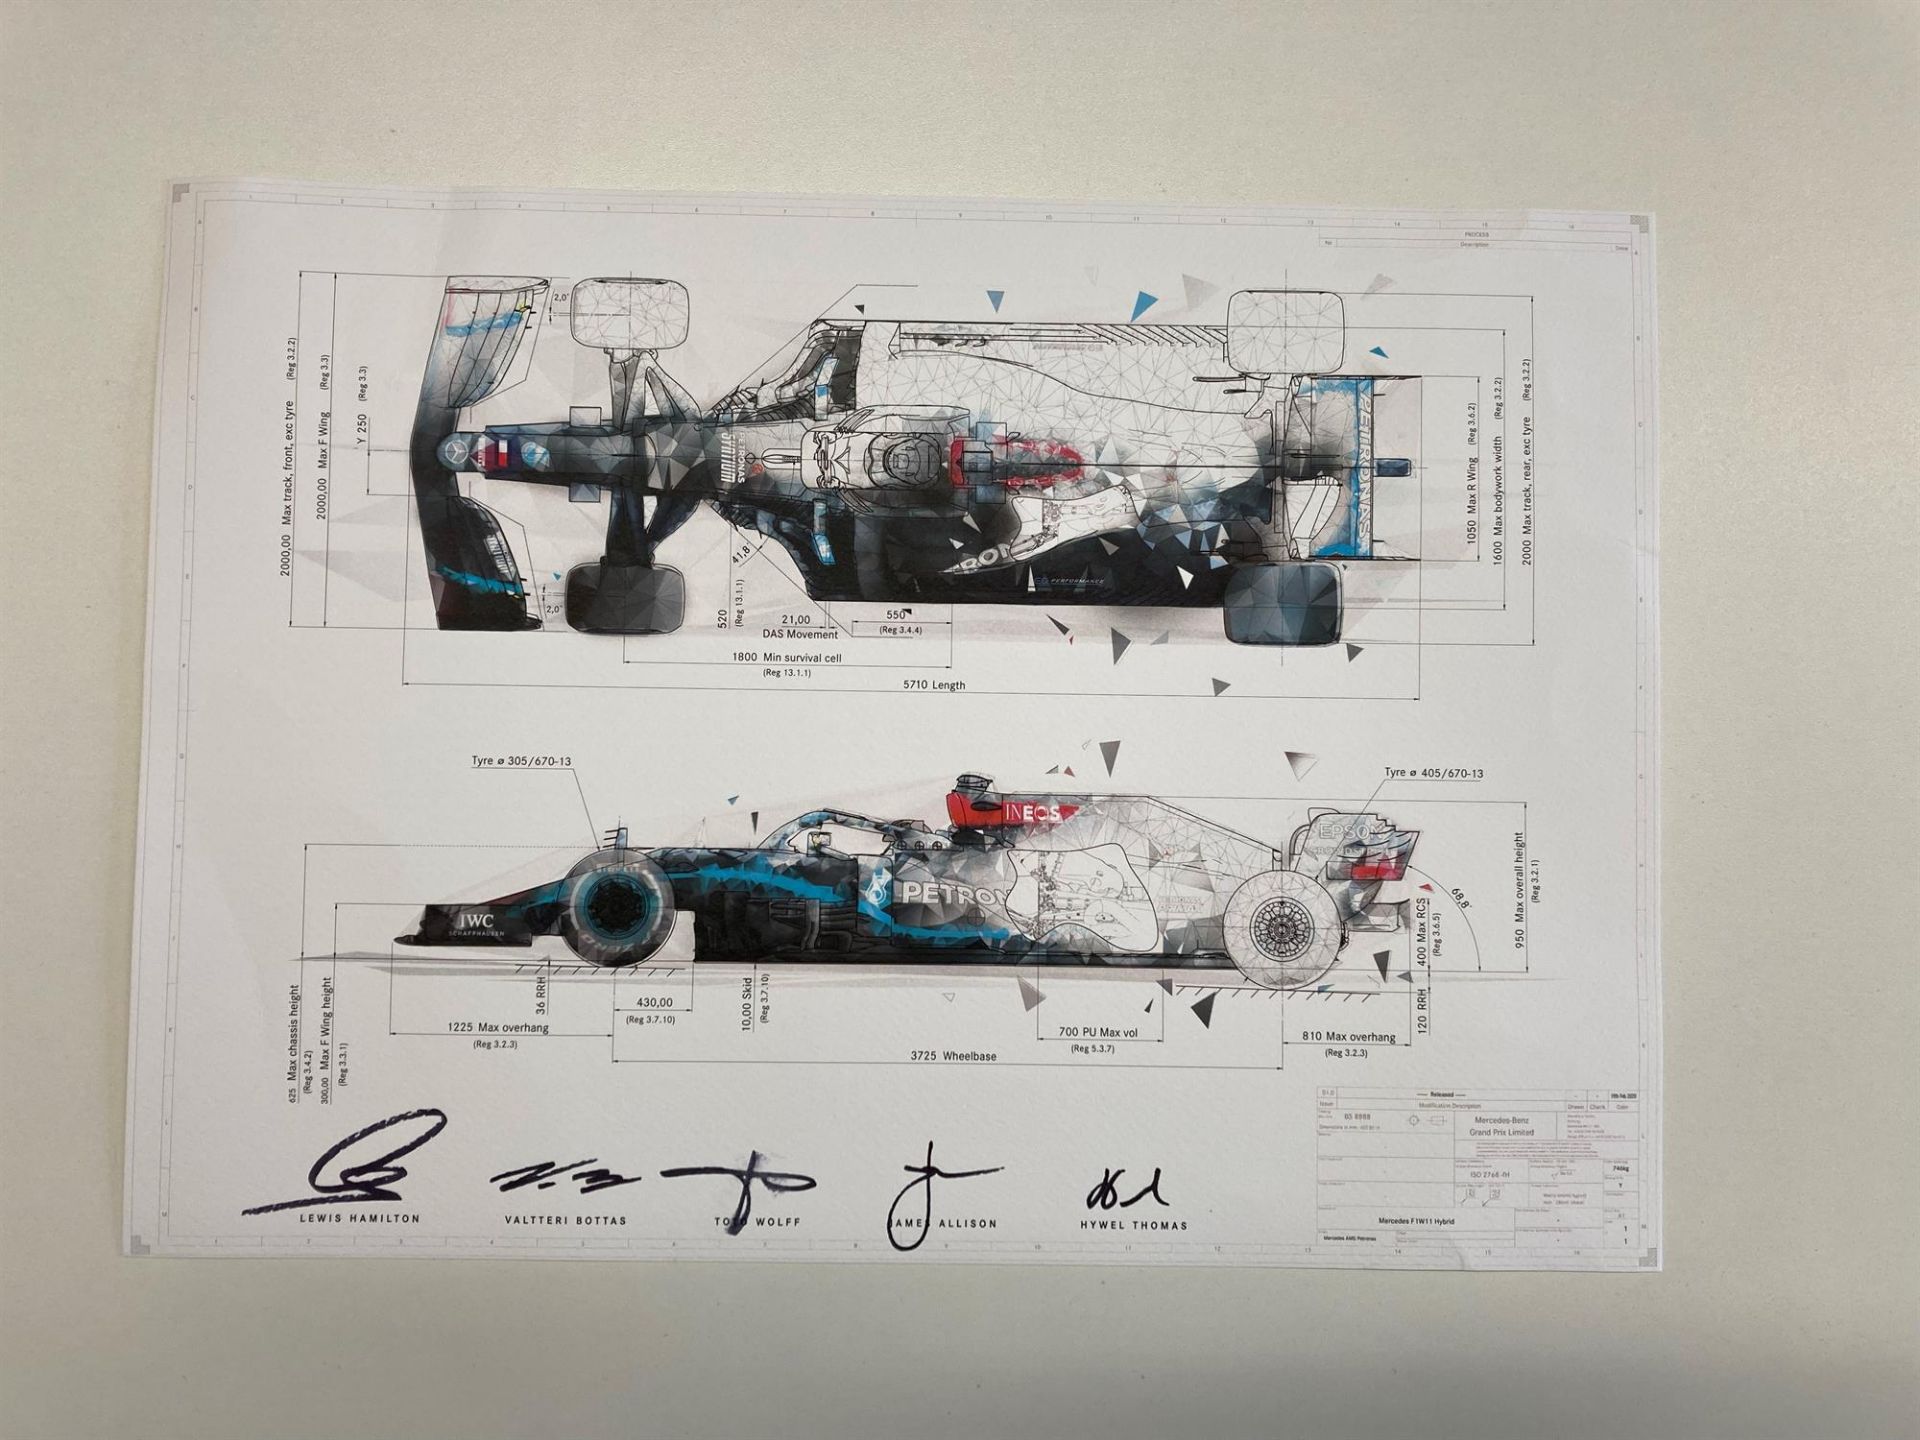 To Benefit Alzheimer's Research UK. Charity Lot: Signed Mercedes F1W11 Hybrid Technical Drawing - Image 4 of 4